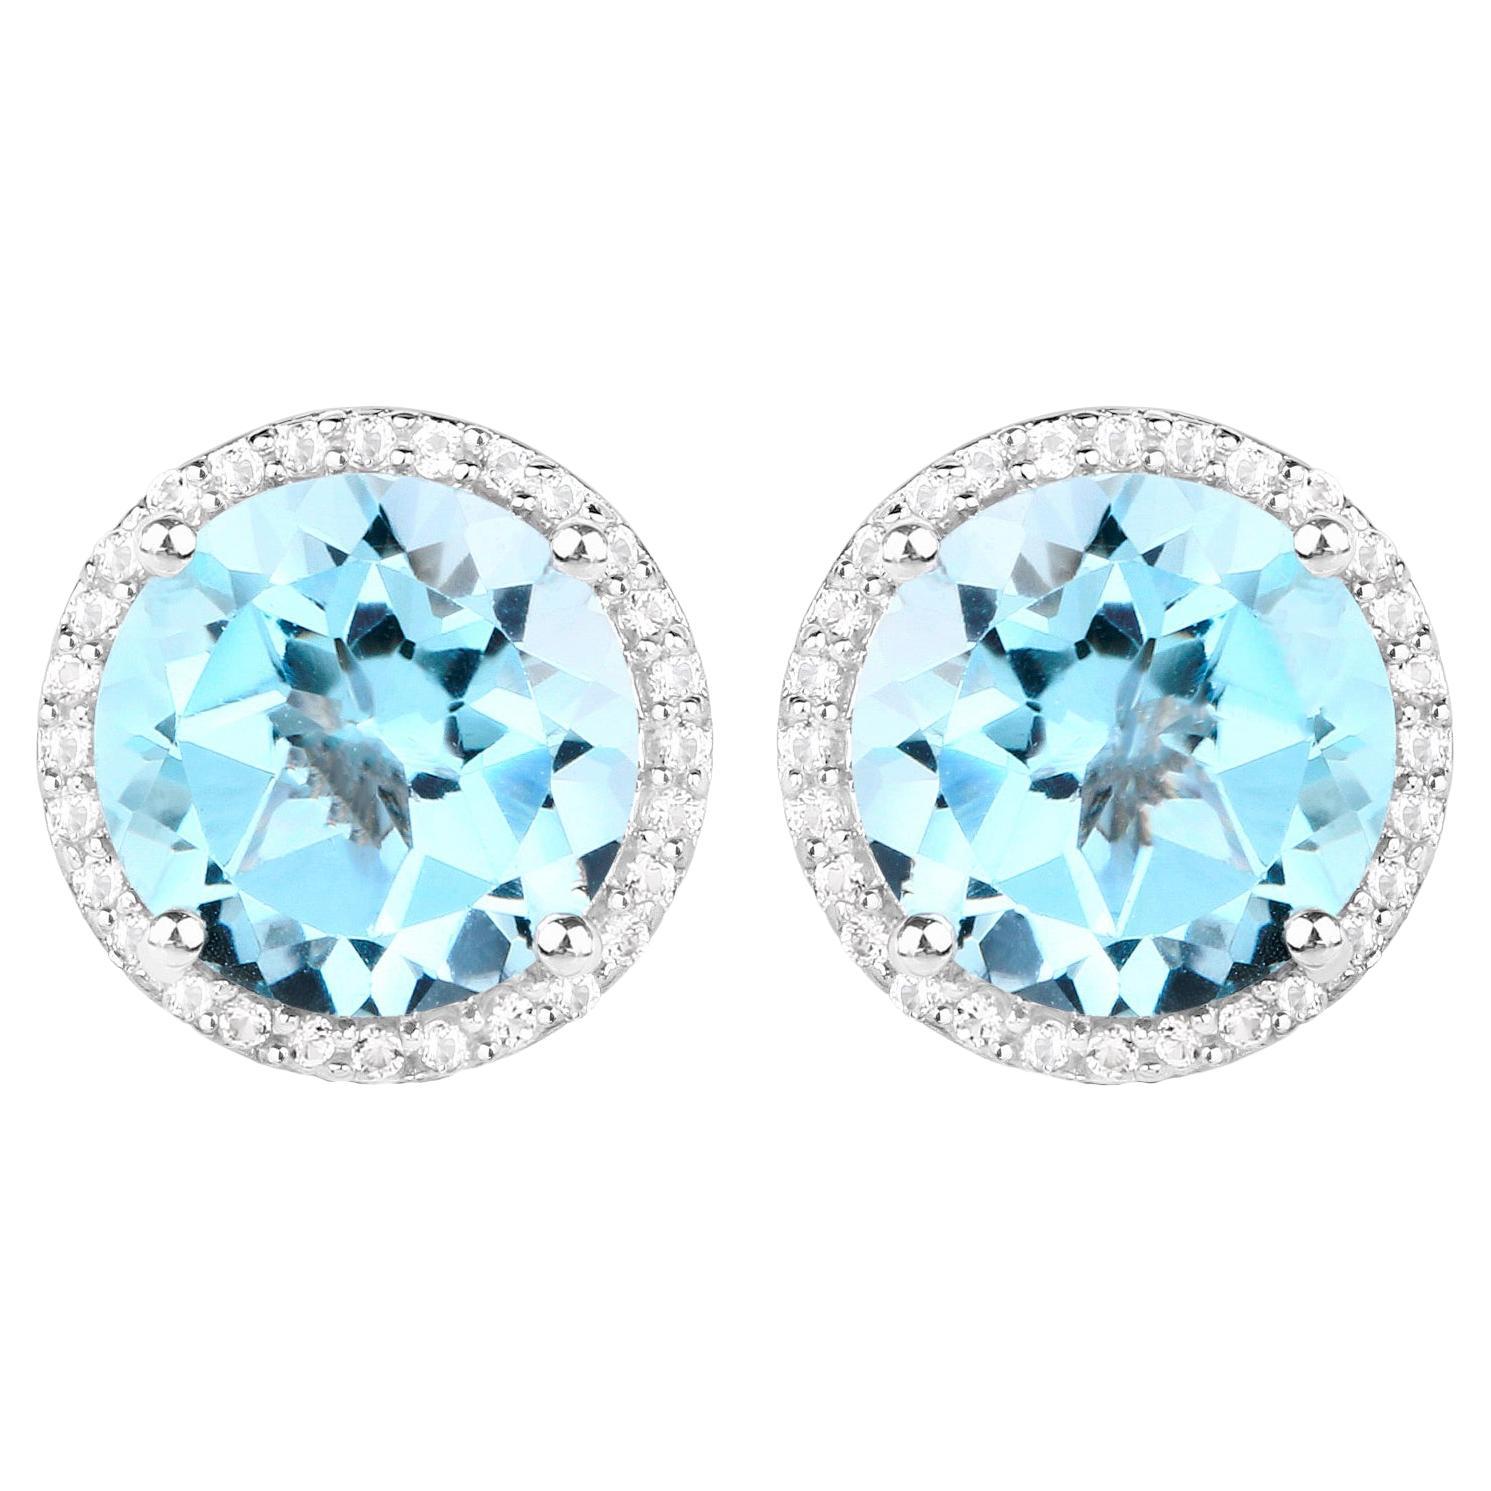 Blue Topaz Stud Earrings White Topaz Halo 7.7 Carats Rhodium Plated Silver For Sale